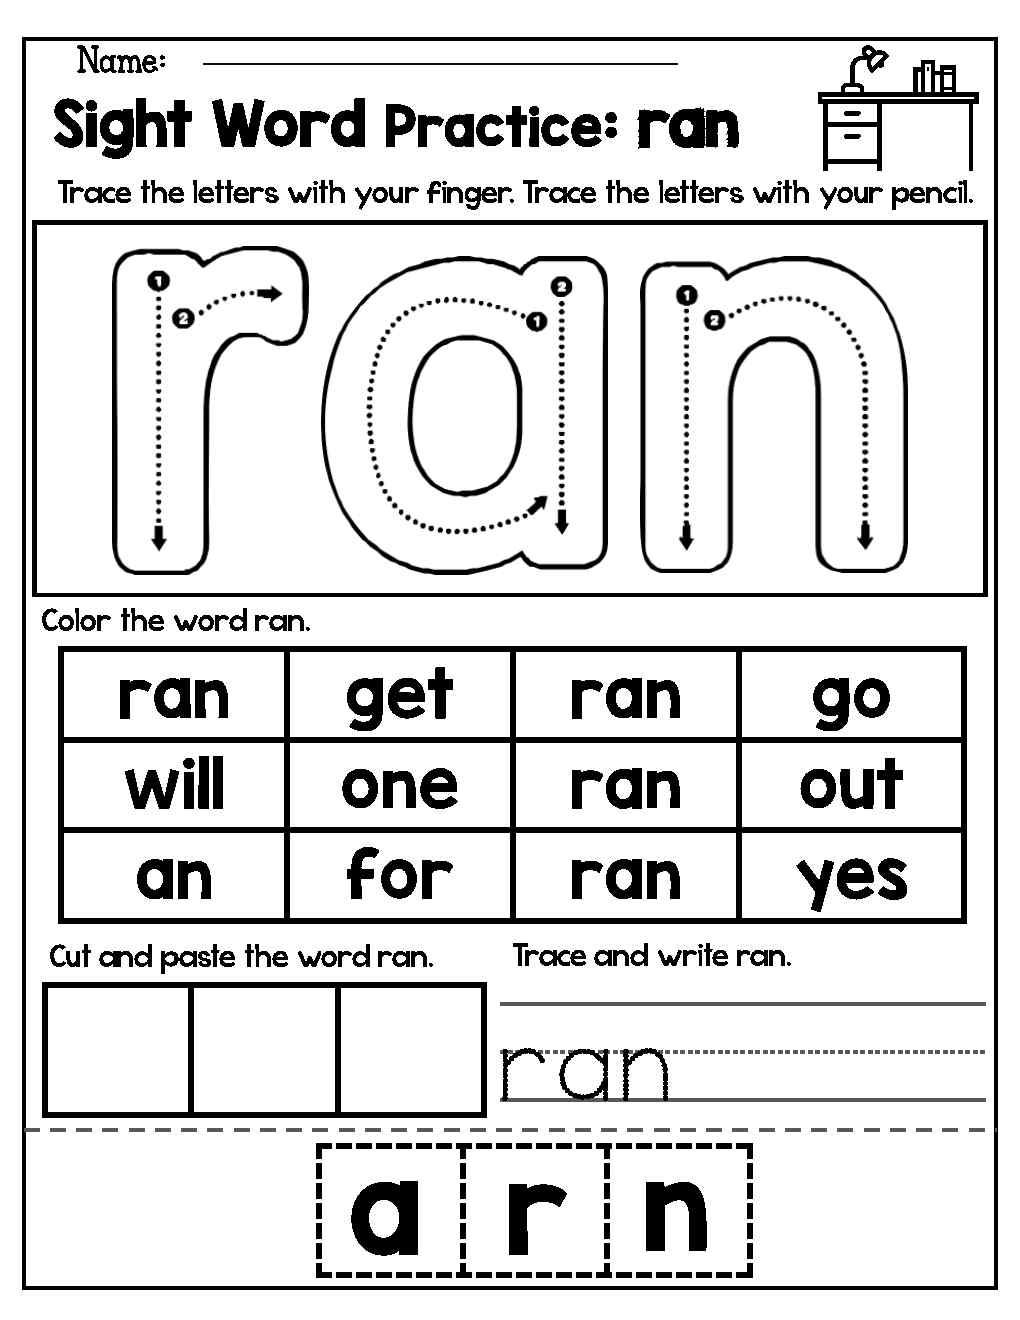 Free Sight Words Worksheets: 5 Ways to Make It Easier for Your Kids to ...